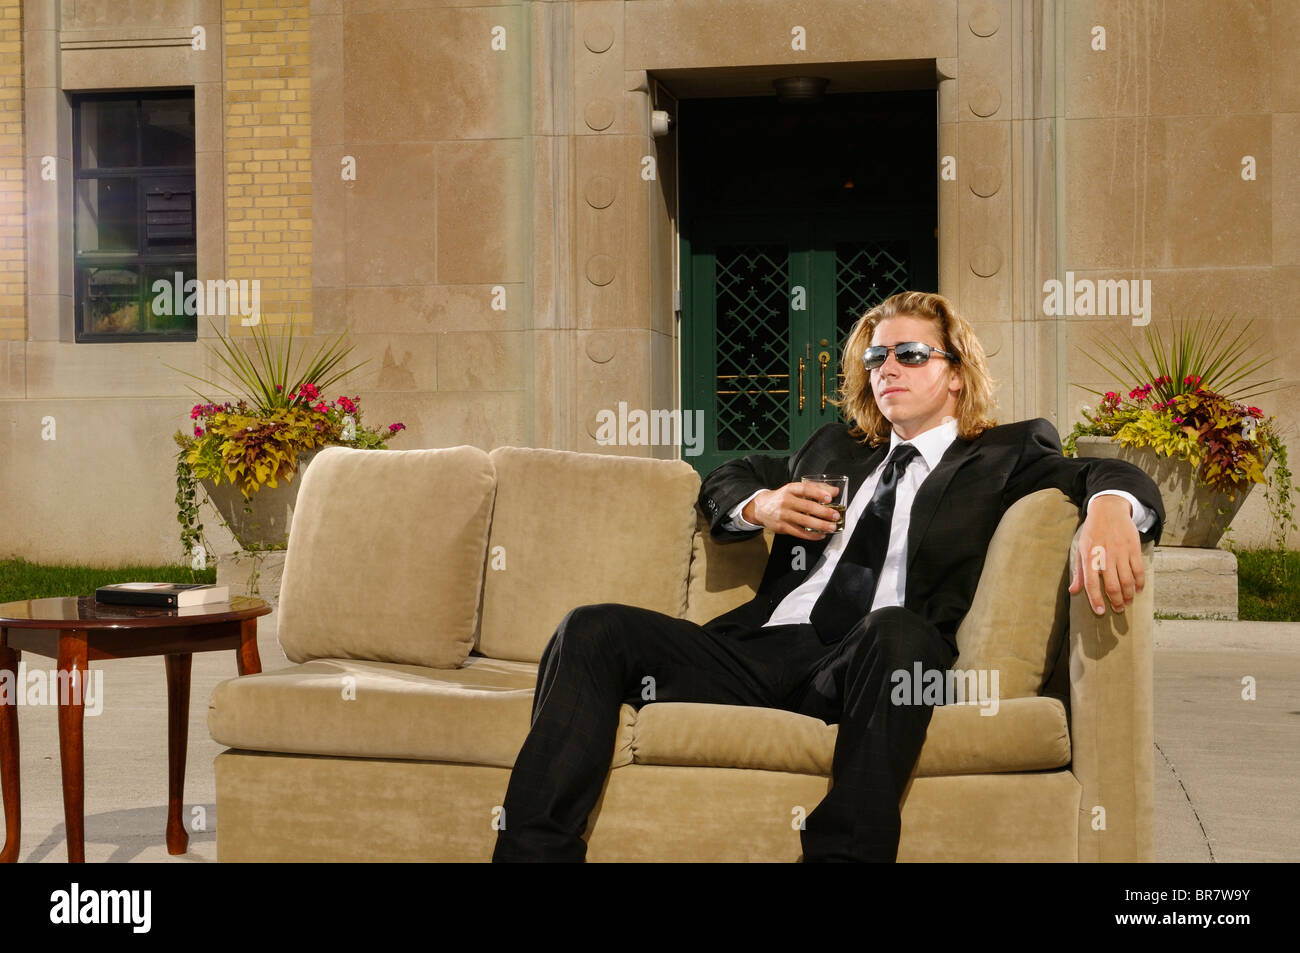 wealthy-young-man-in-suit-sitting-on-a-c